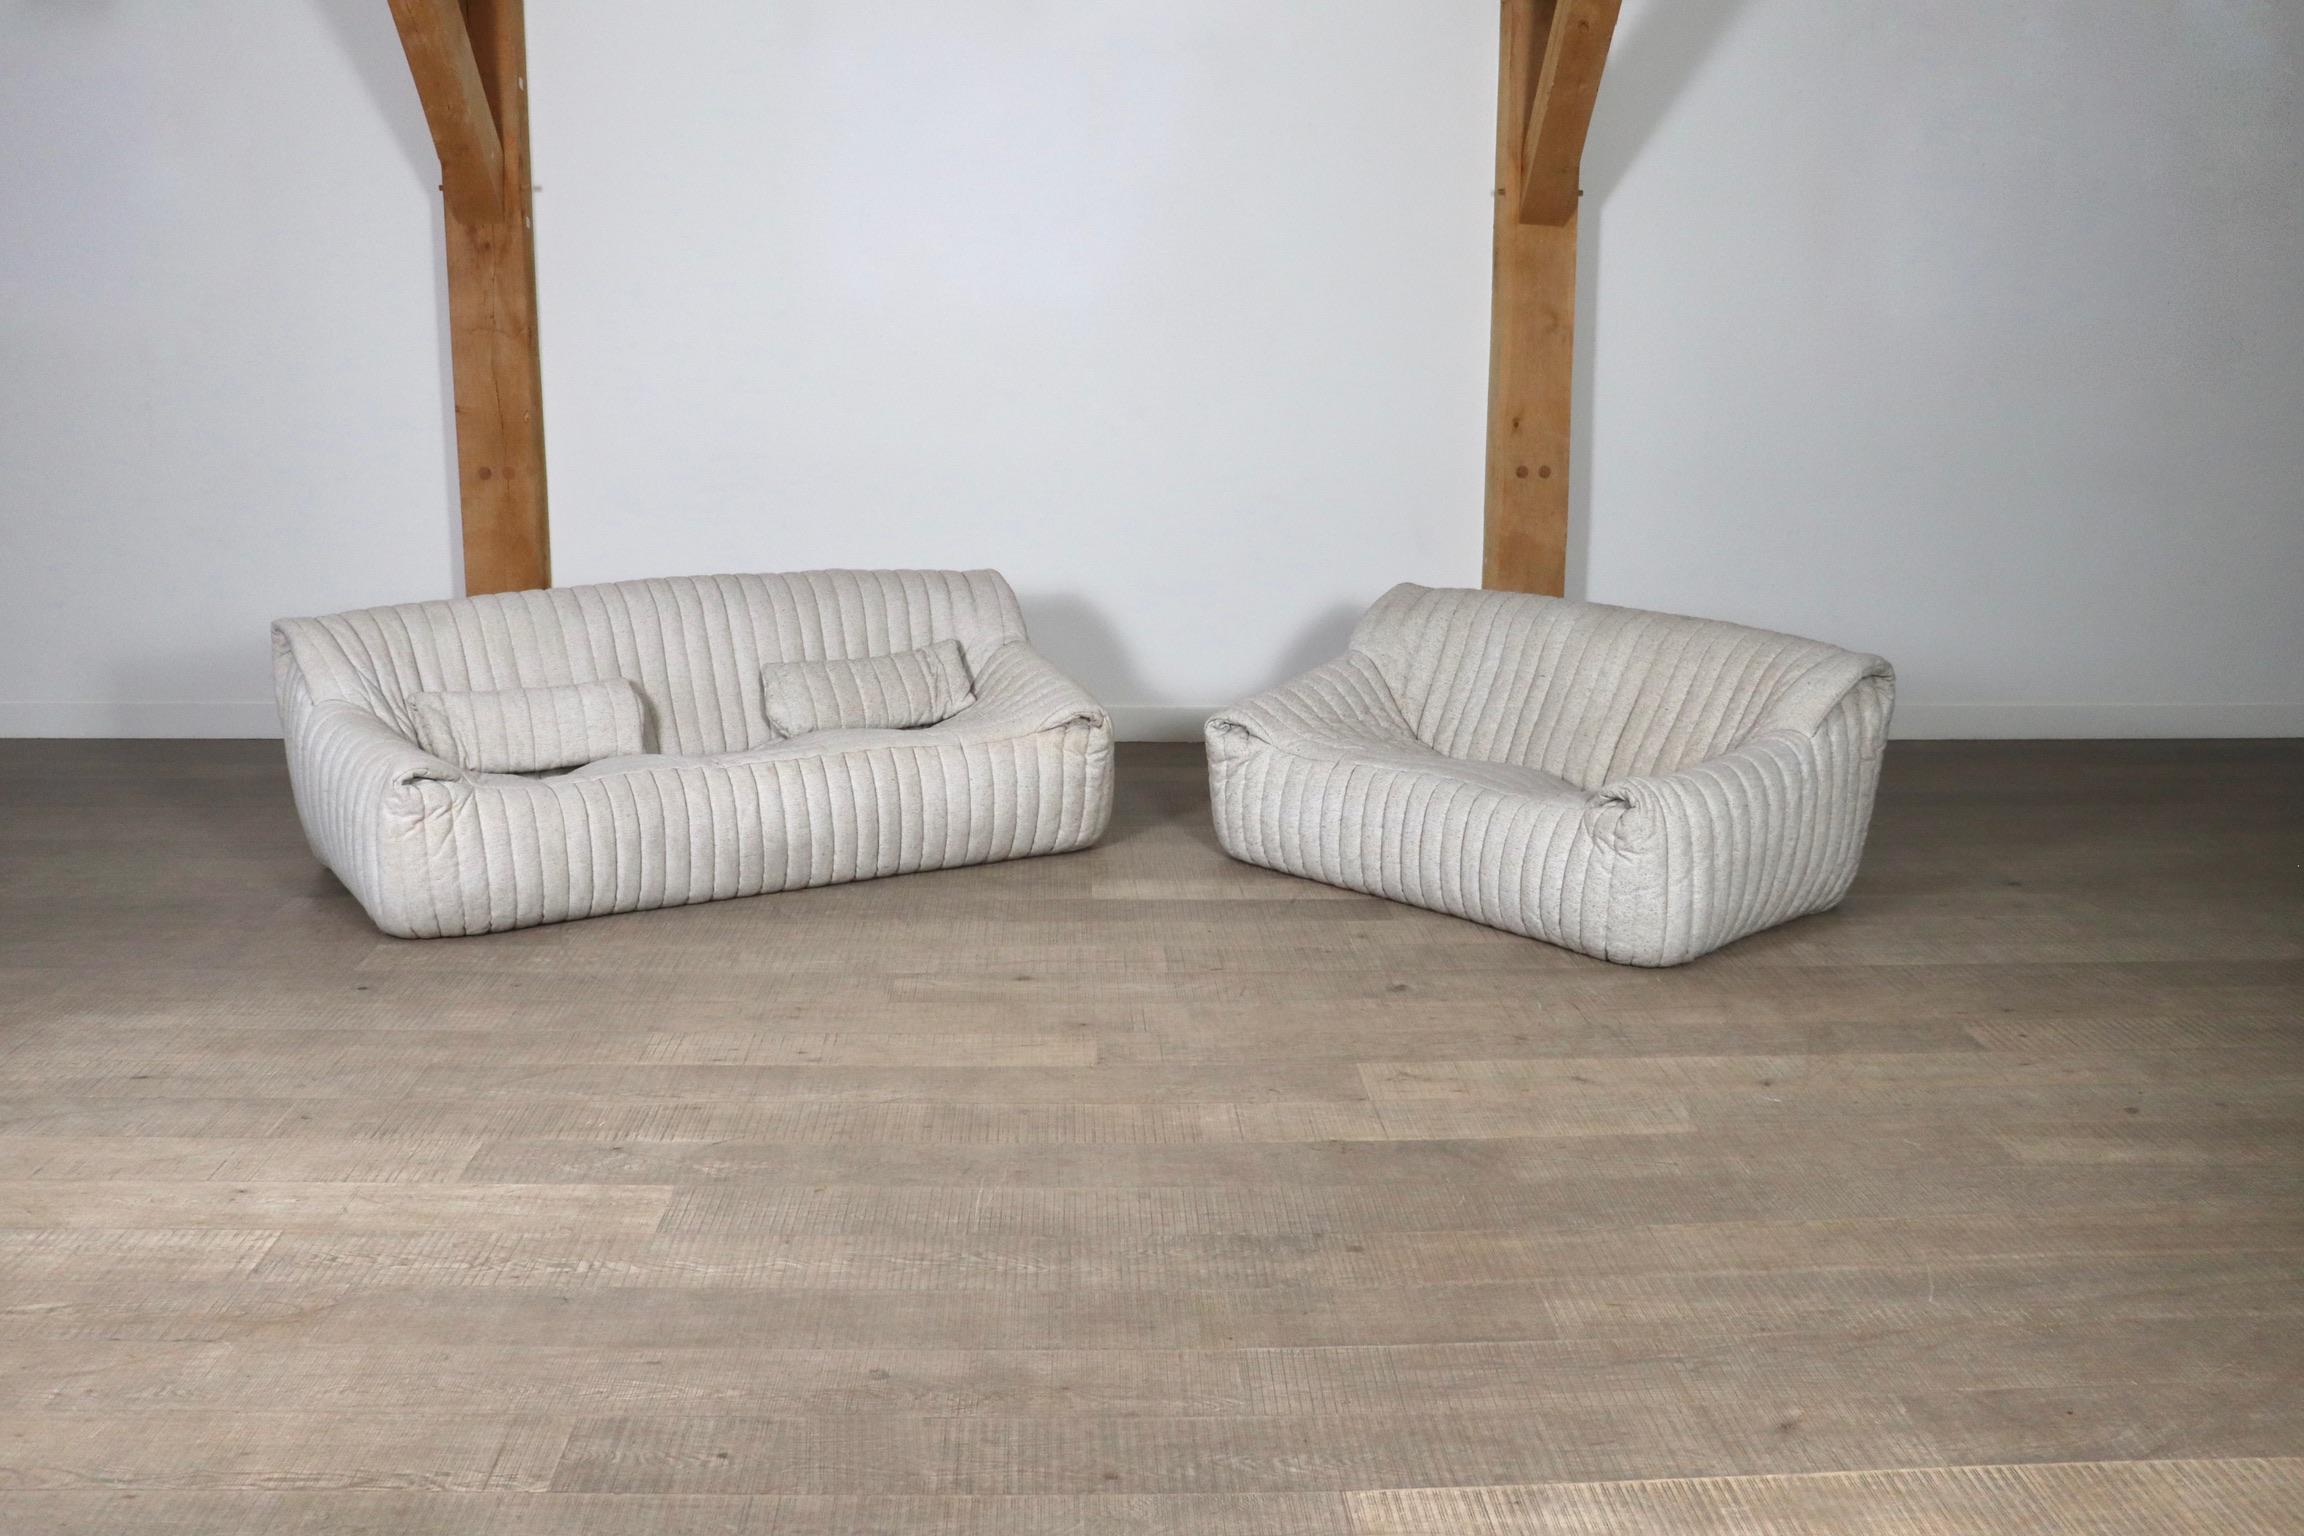 Beautiful original three seater and two seater sofa in an off-white textured upholstery, by Annie Hieronimus for Cinna, a division of Ligne Roset, France 1970s. This incredibly comfortable, yet lightweight design will instantly bring character to